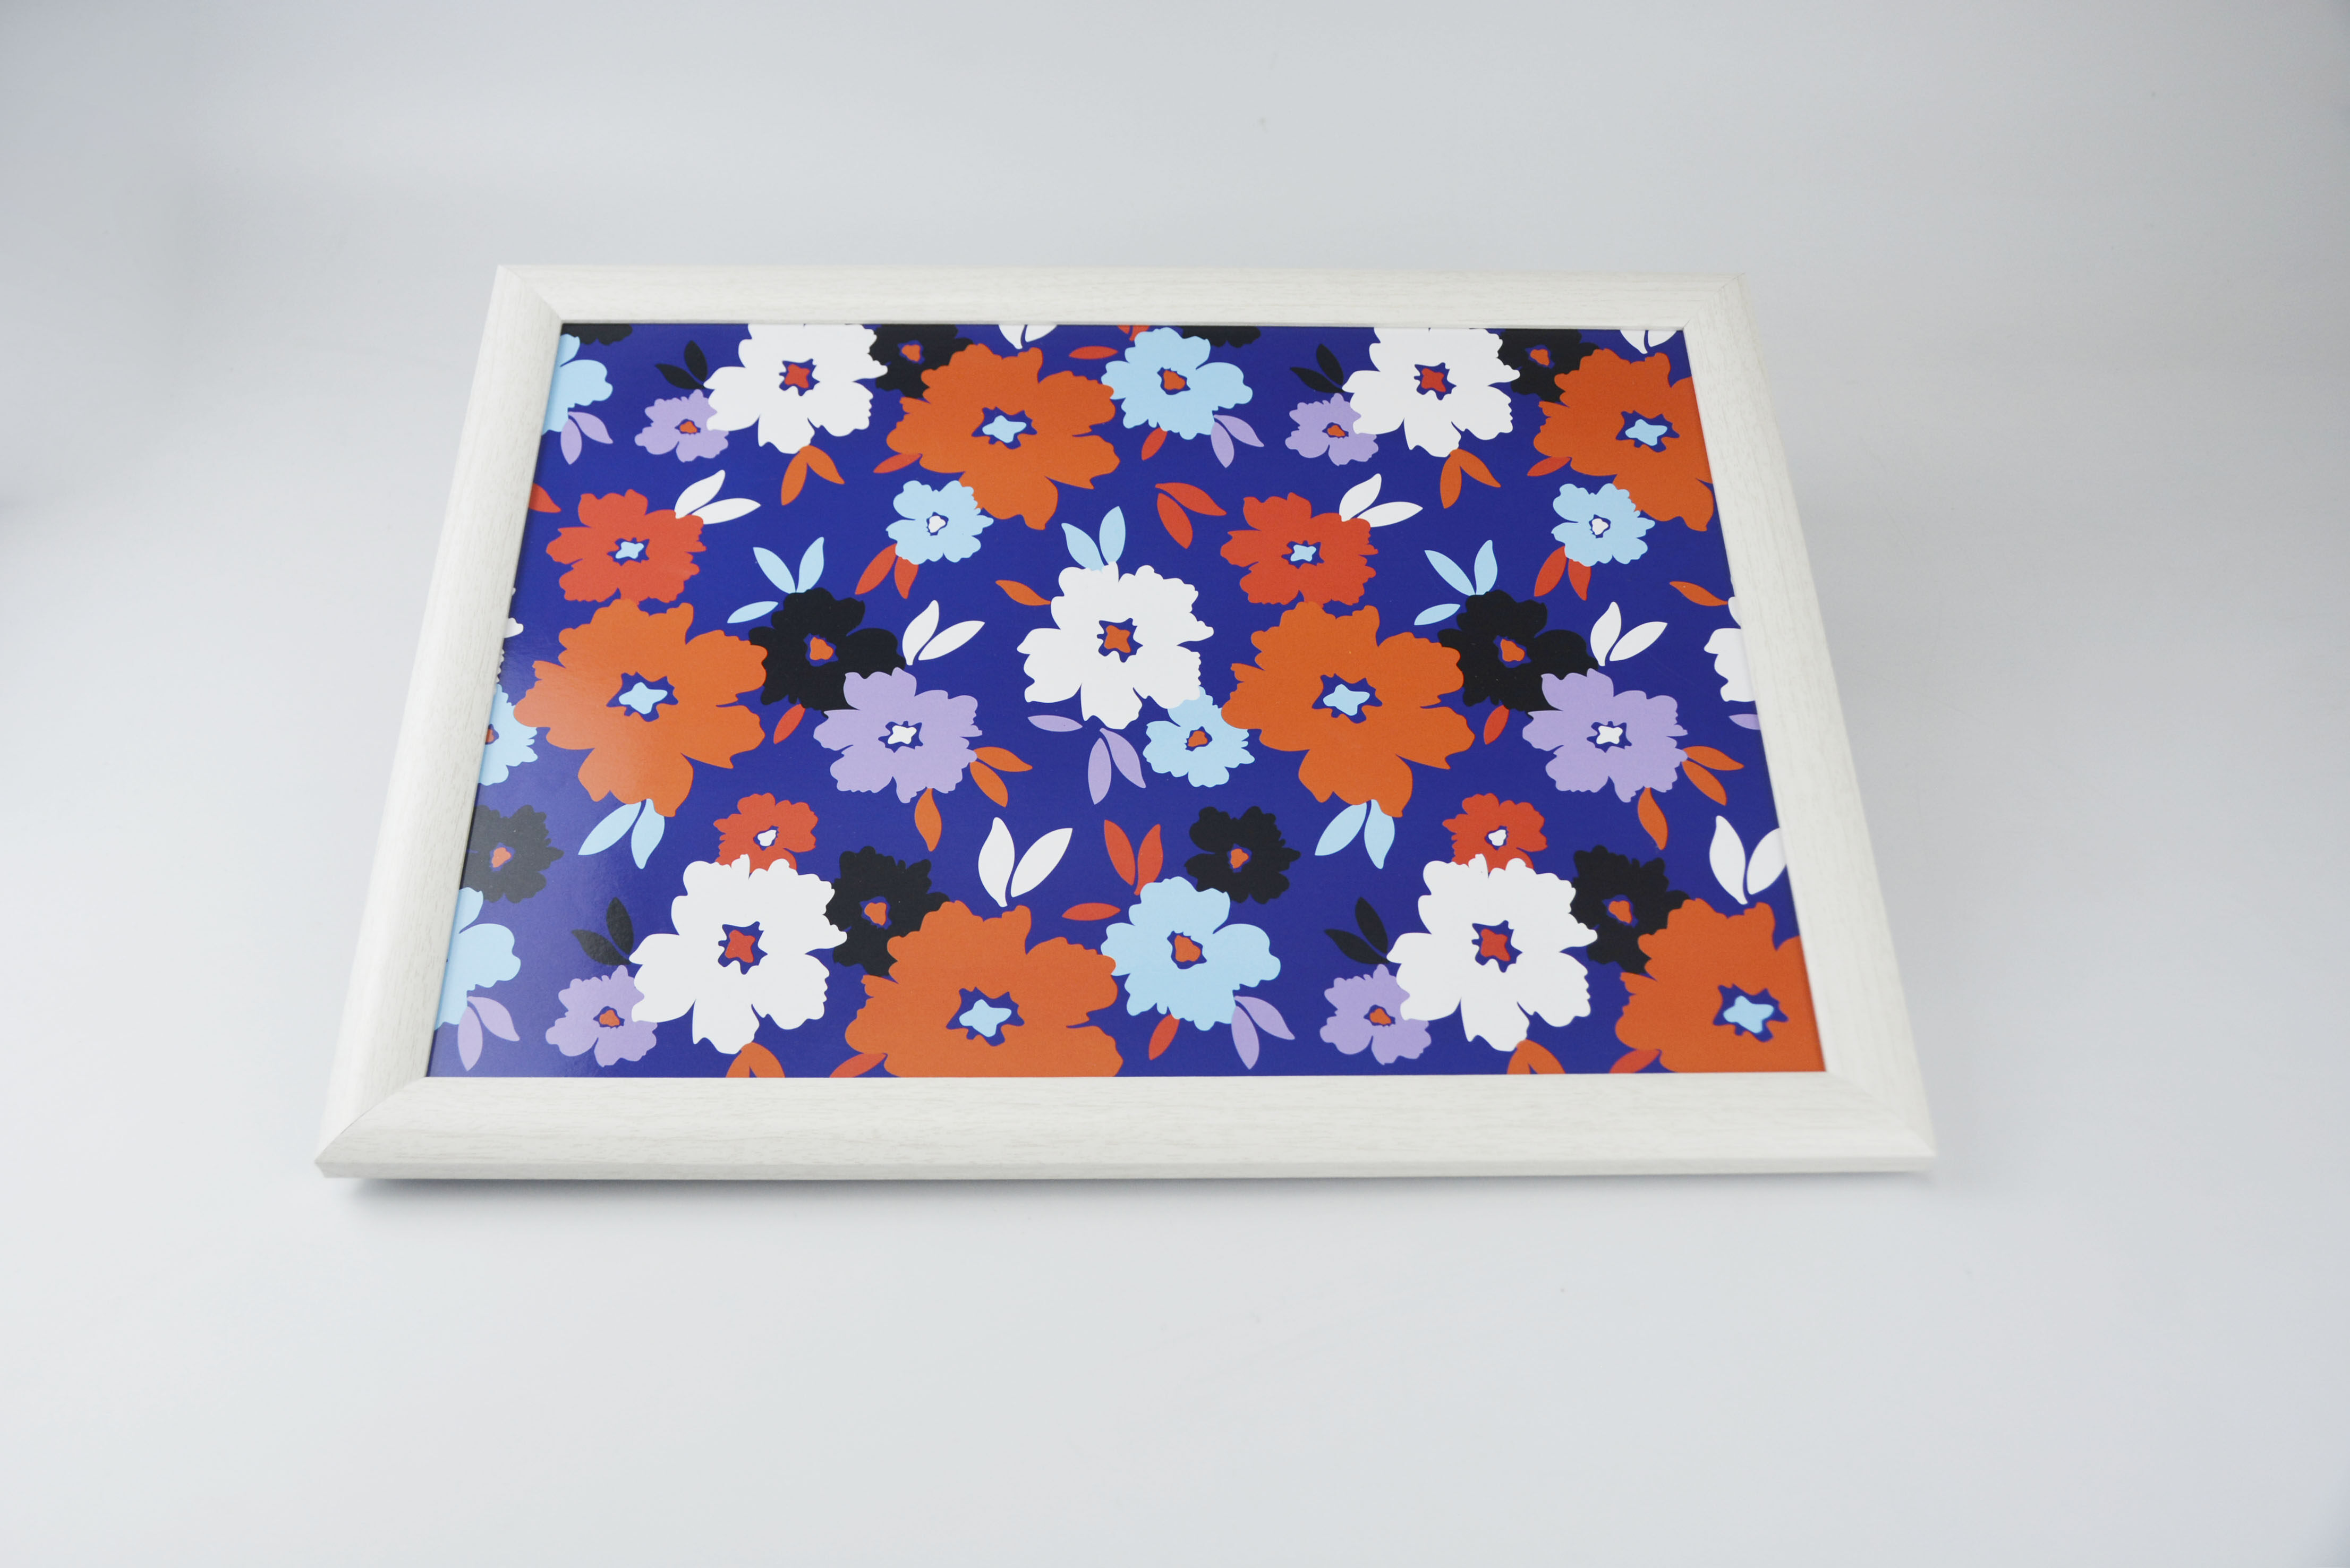 Wooden lap tray with knitted fabric mat waterproof and heat-insulating UV coating